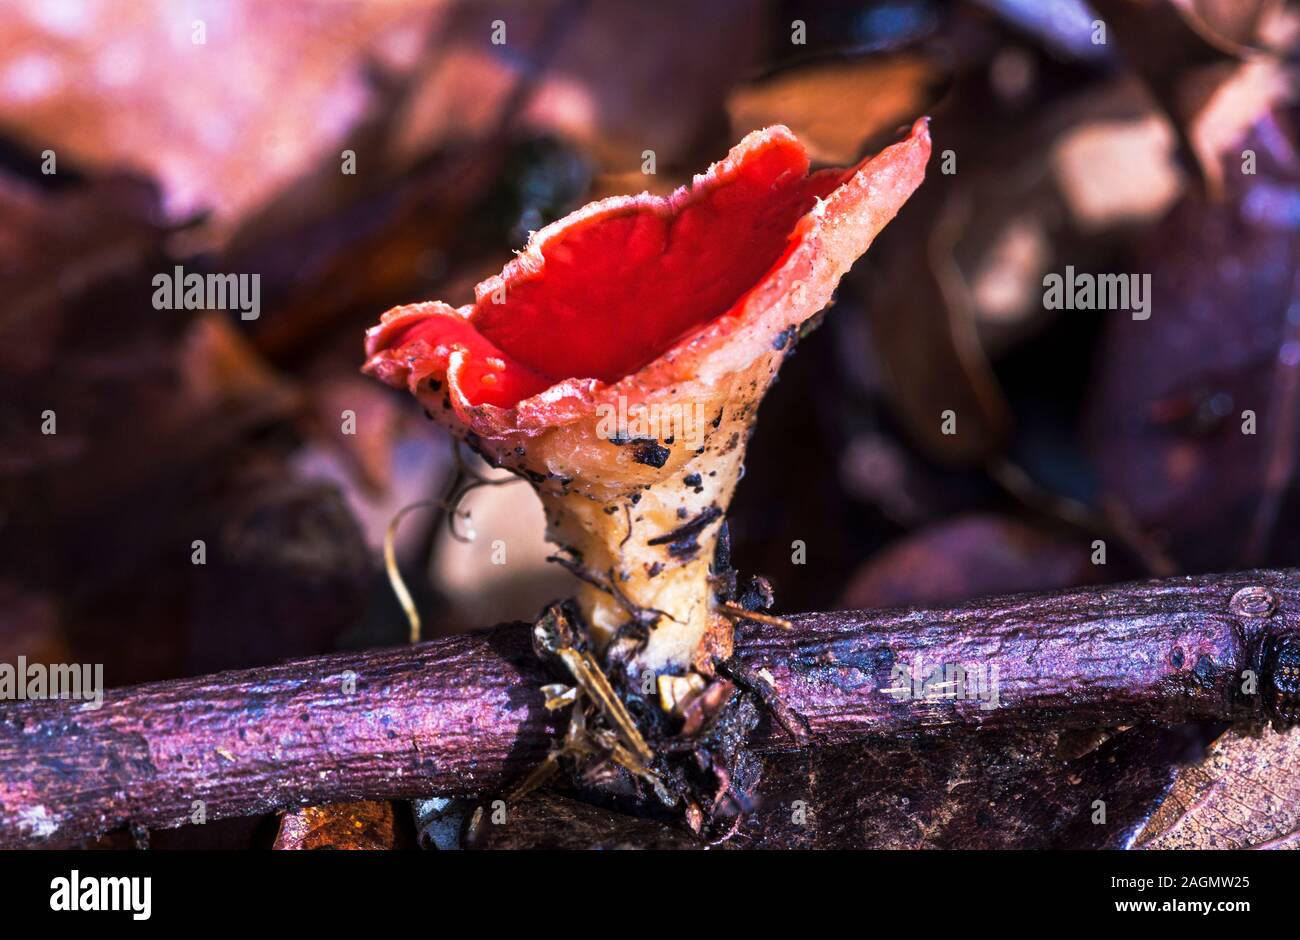 Fungus. Scarlet Elf Cap 'Sarcoscypha coccinea'.Photo in my garden in South-west France. Stock Photo